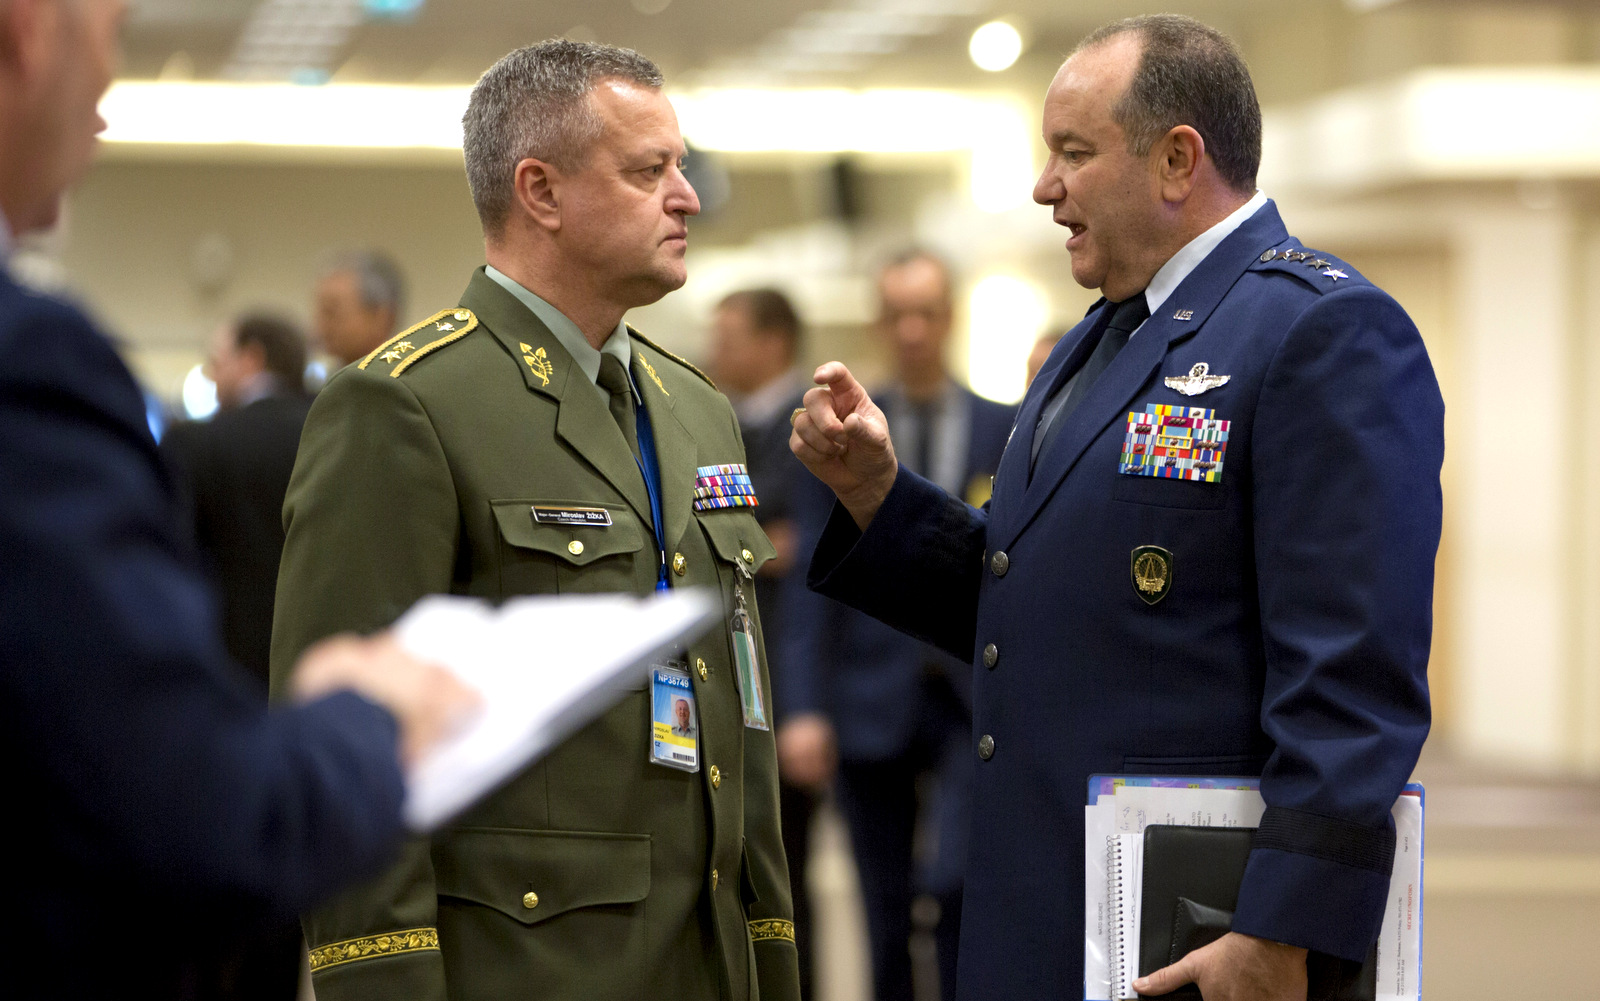 Supreme Allied Commander Europe, Gen. Philip Breedlove, right, speaks with Czech Republic's NATO-EU military representative Maj. Gen. Miroslav Zizka, center, prior to a meeting at NATO headquarters in Brussels on Wednesday, Feb. 10, 2016. NATO defense ministers convene a two-day meeting to discuss current defense issues and whether the Alliance should take a more direct role in dealing with its gravest migrant crisis since WWII. (AP Photo/Virginia Mayo, Pool)